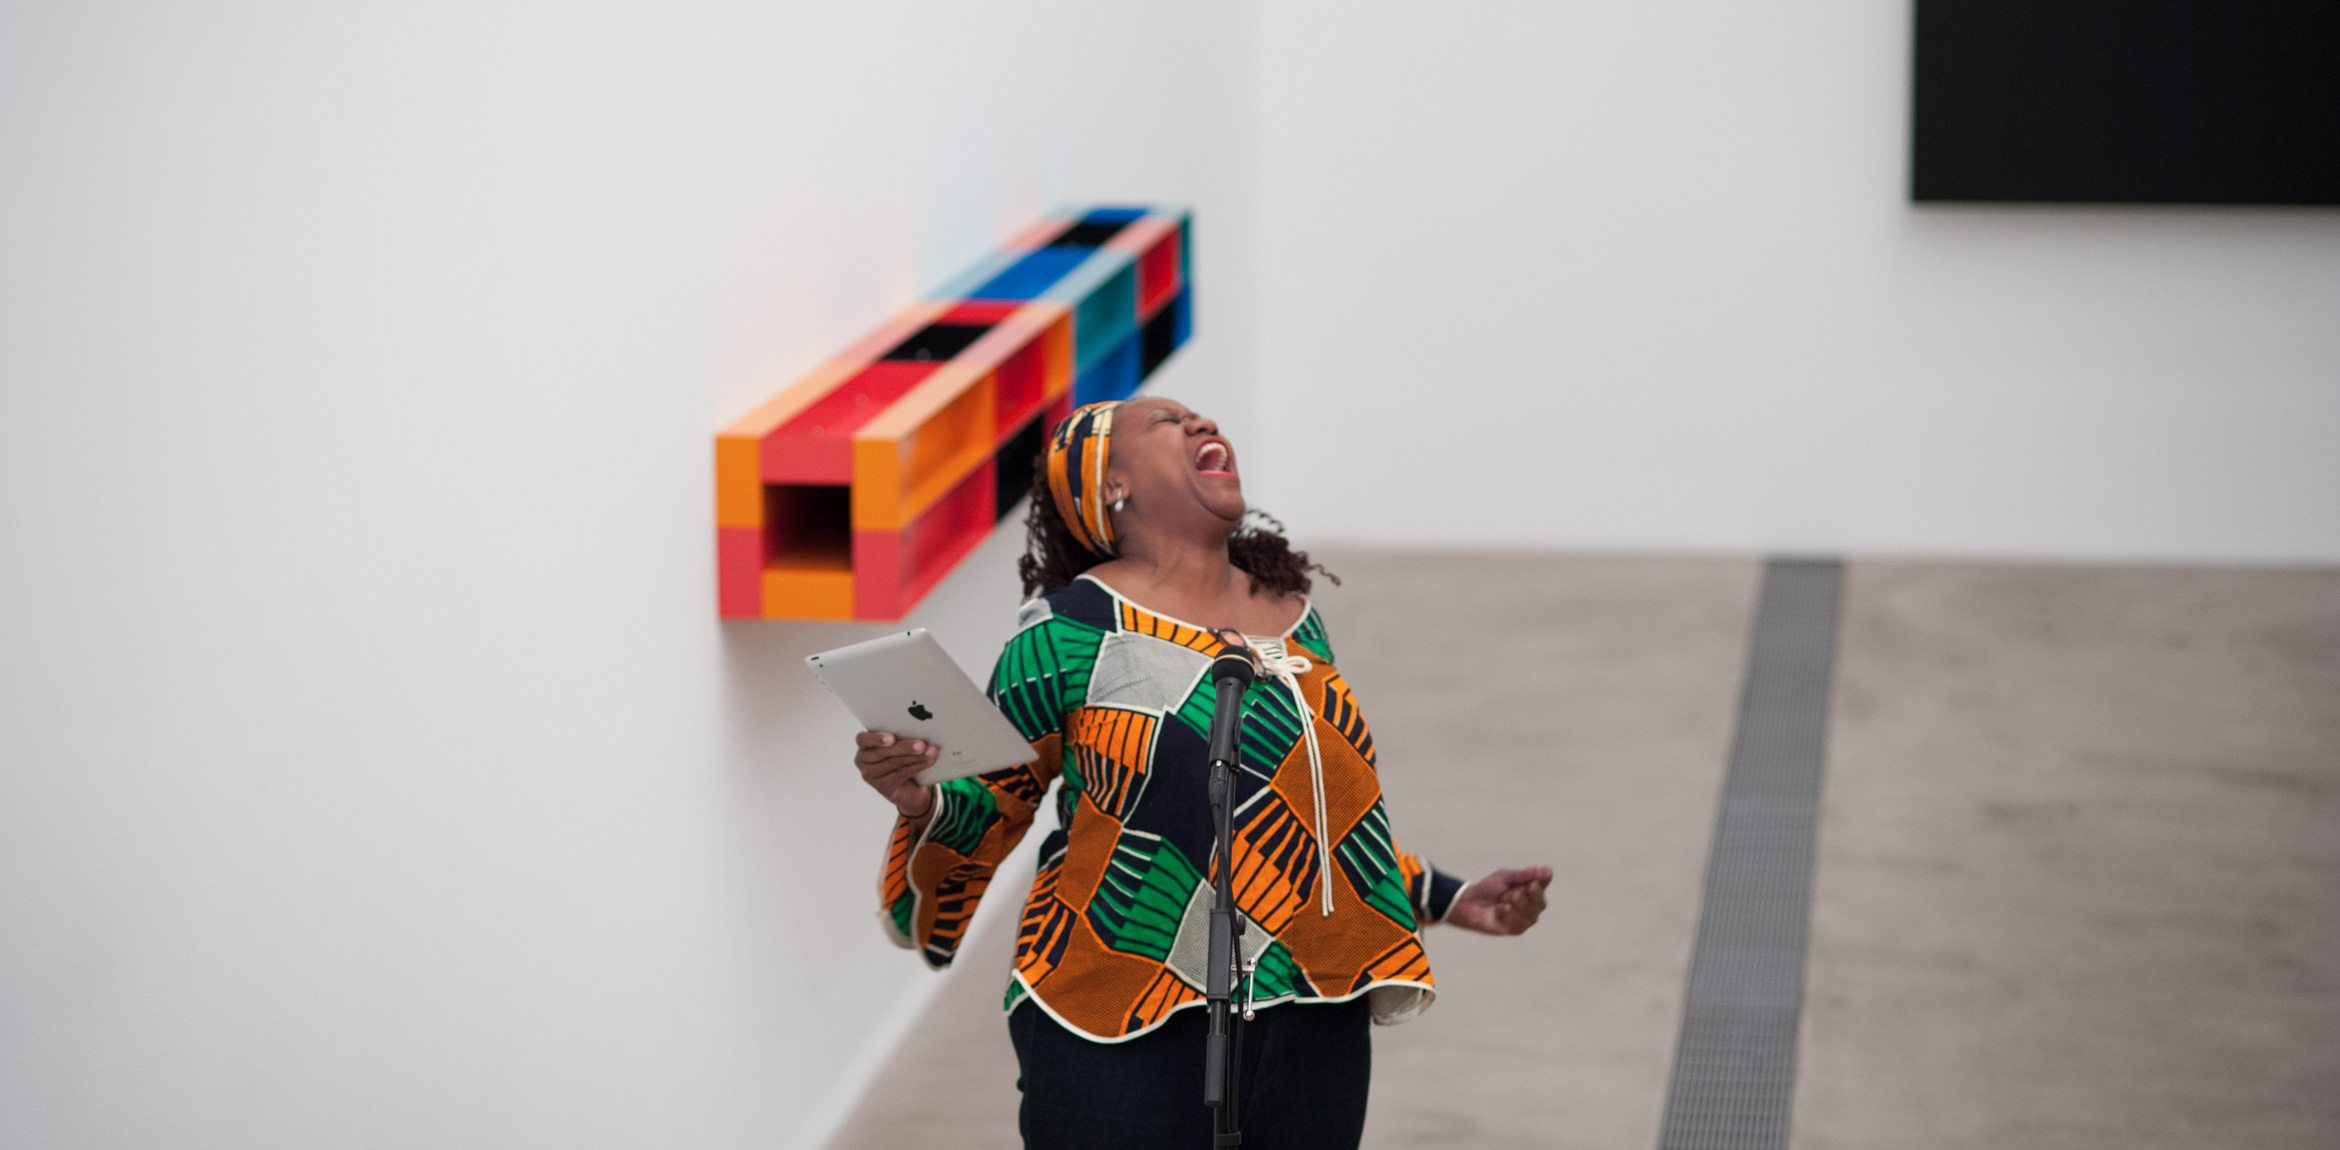 Treasure Shields Redmond gives a passionate performance of her poetry in front of Ellsworth Kelly's "Blue Black," a microphone in front of her and an iPad in her hand.